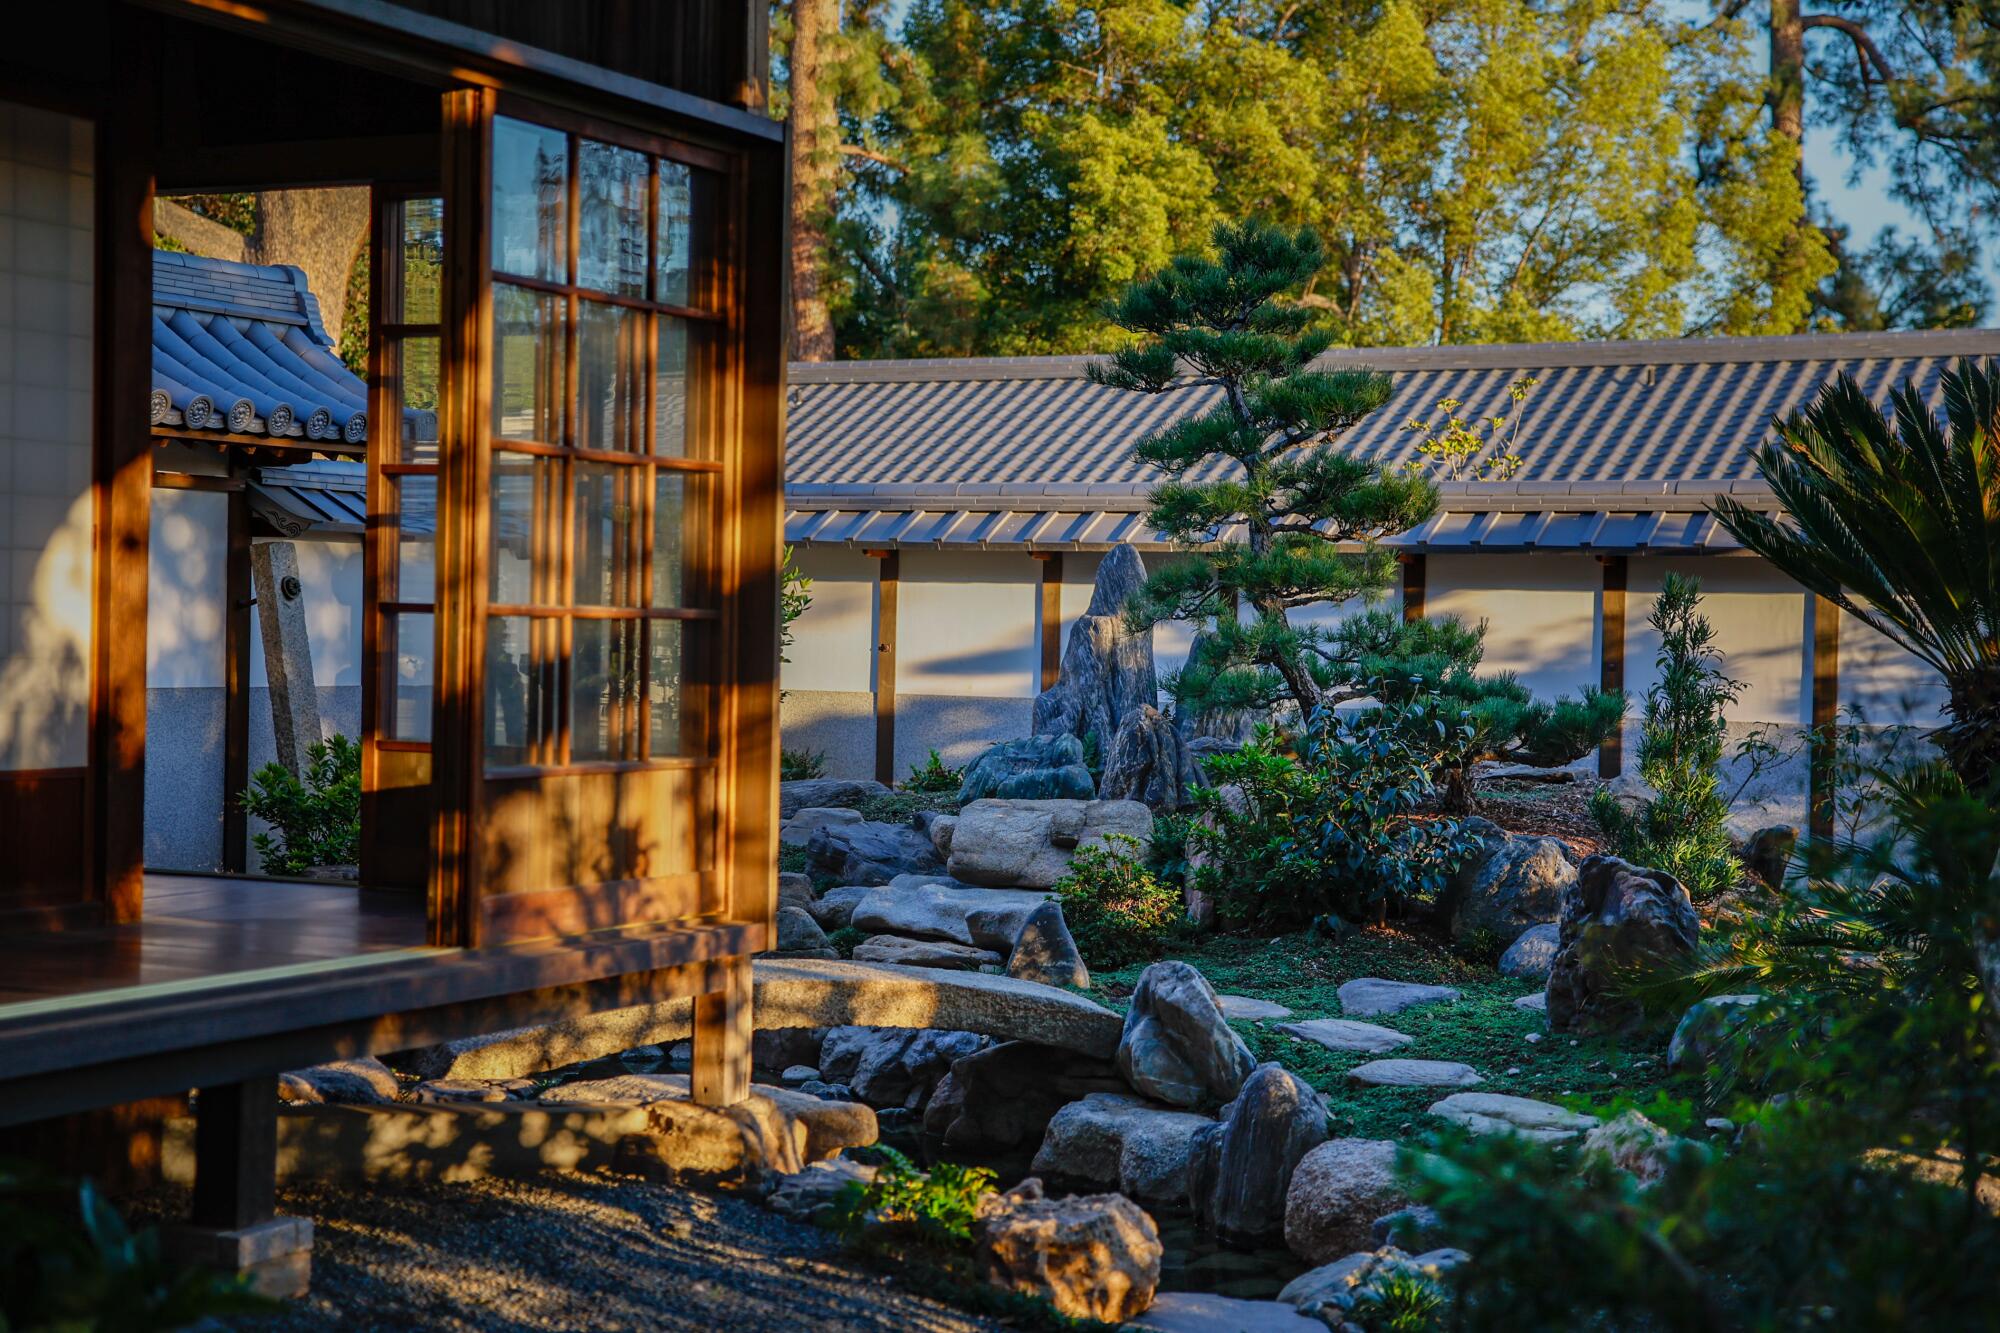 The private garden at the ancient Japanese Heritage Shōya House.